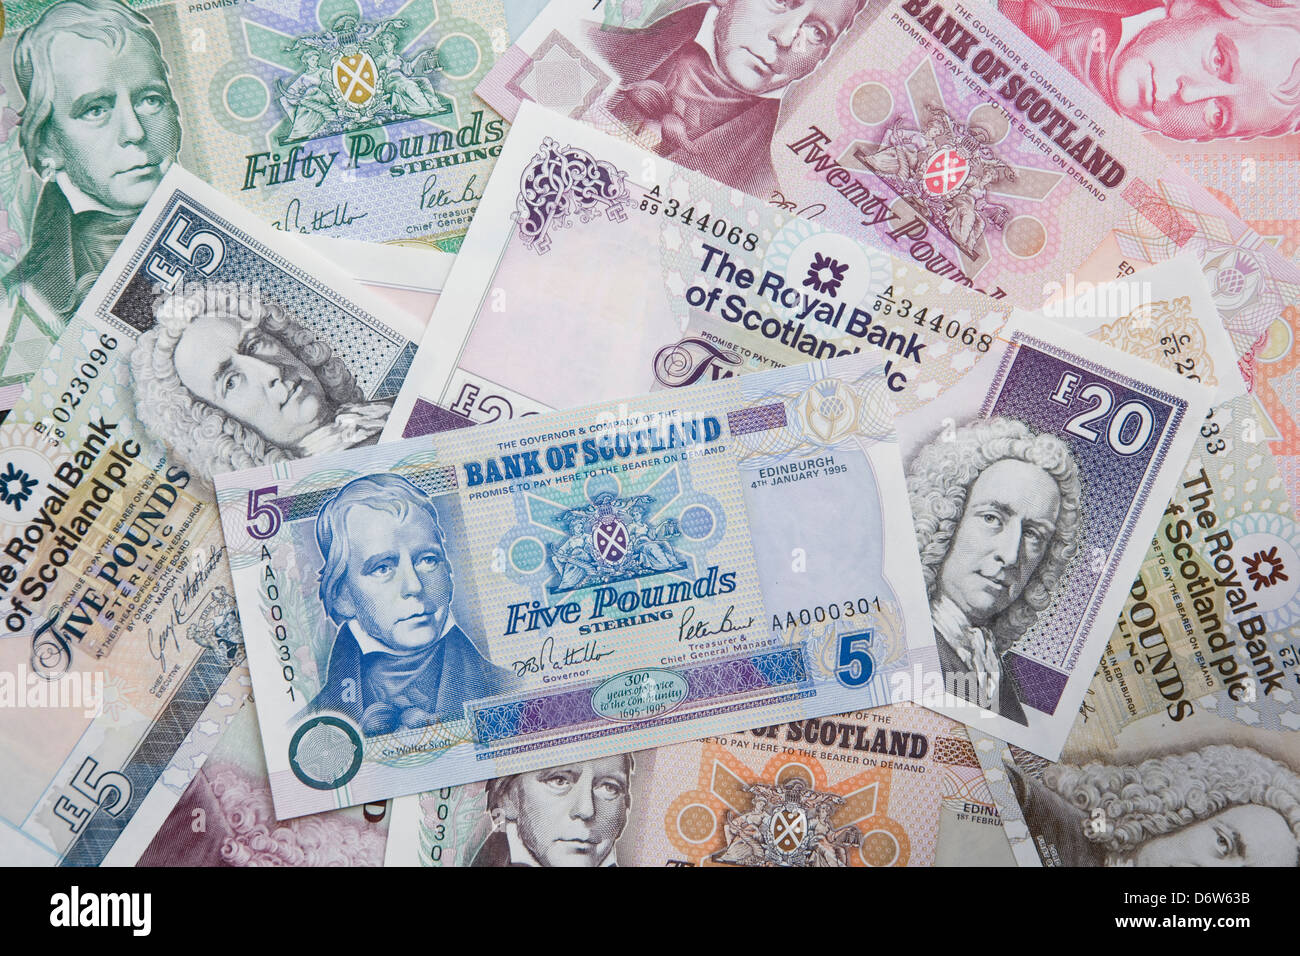 Scottish banknotes of varying denominations issued by the Bank of Scotland and Royal Bank of Scotland. Stock Photo